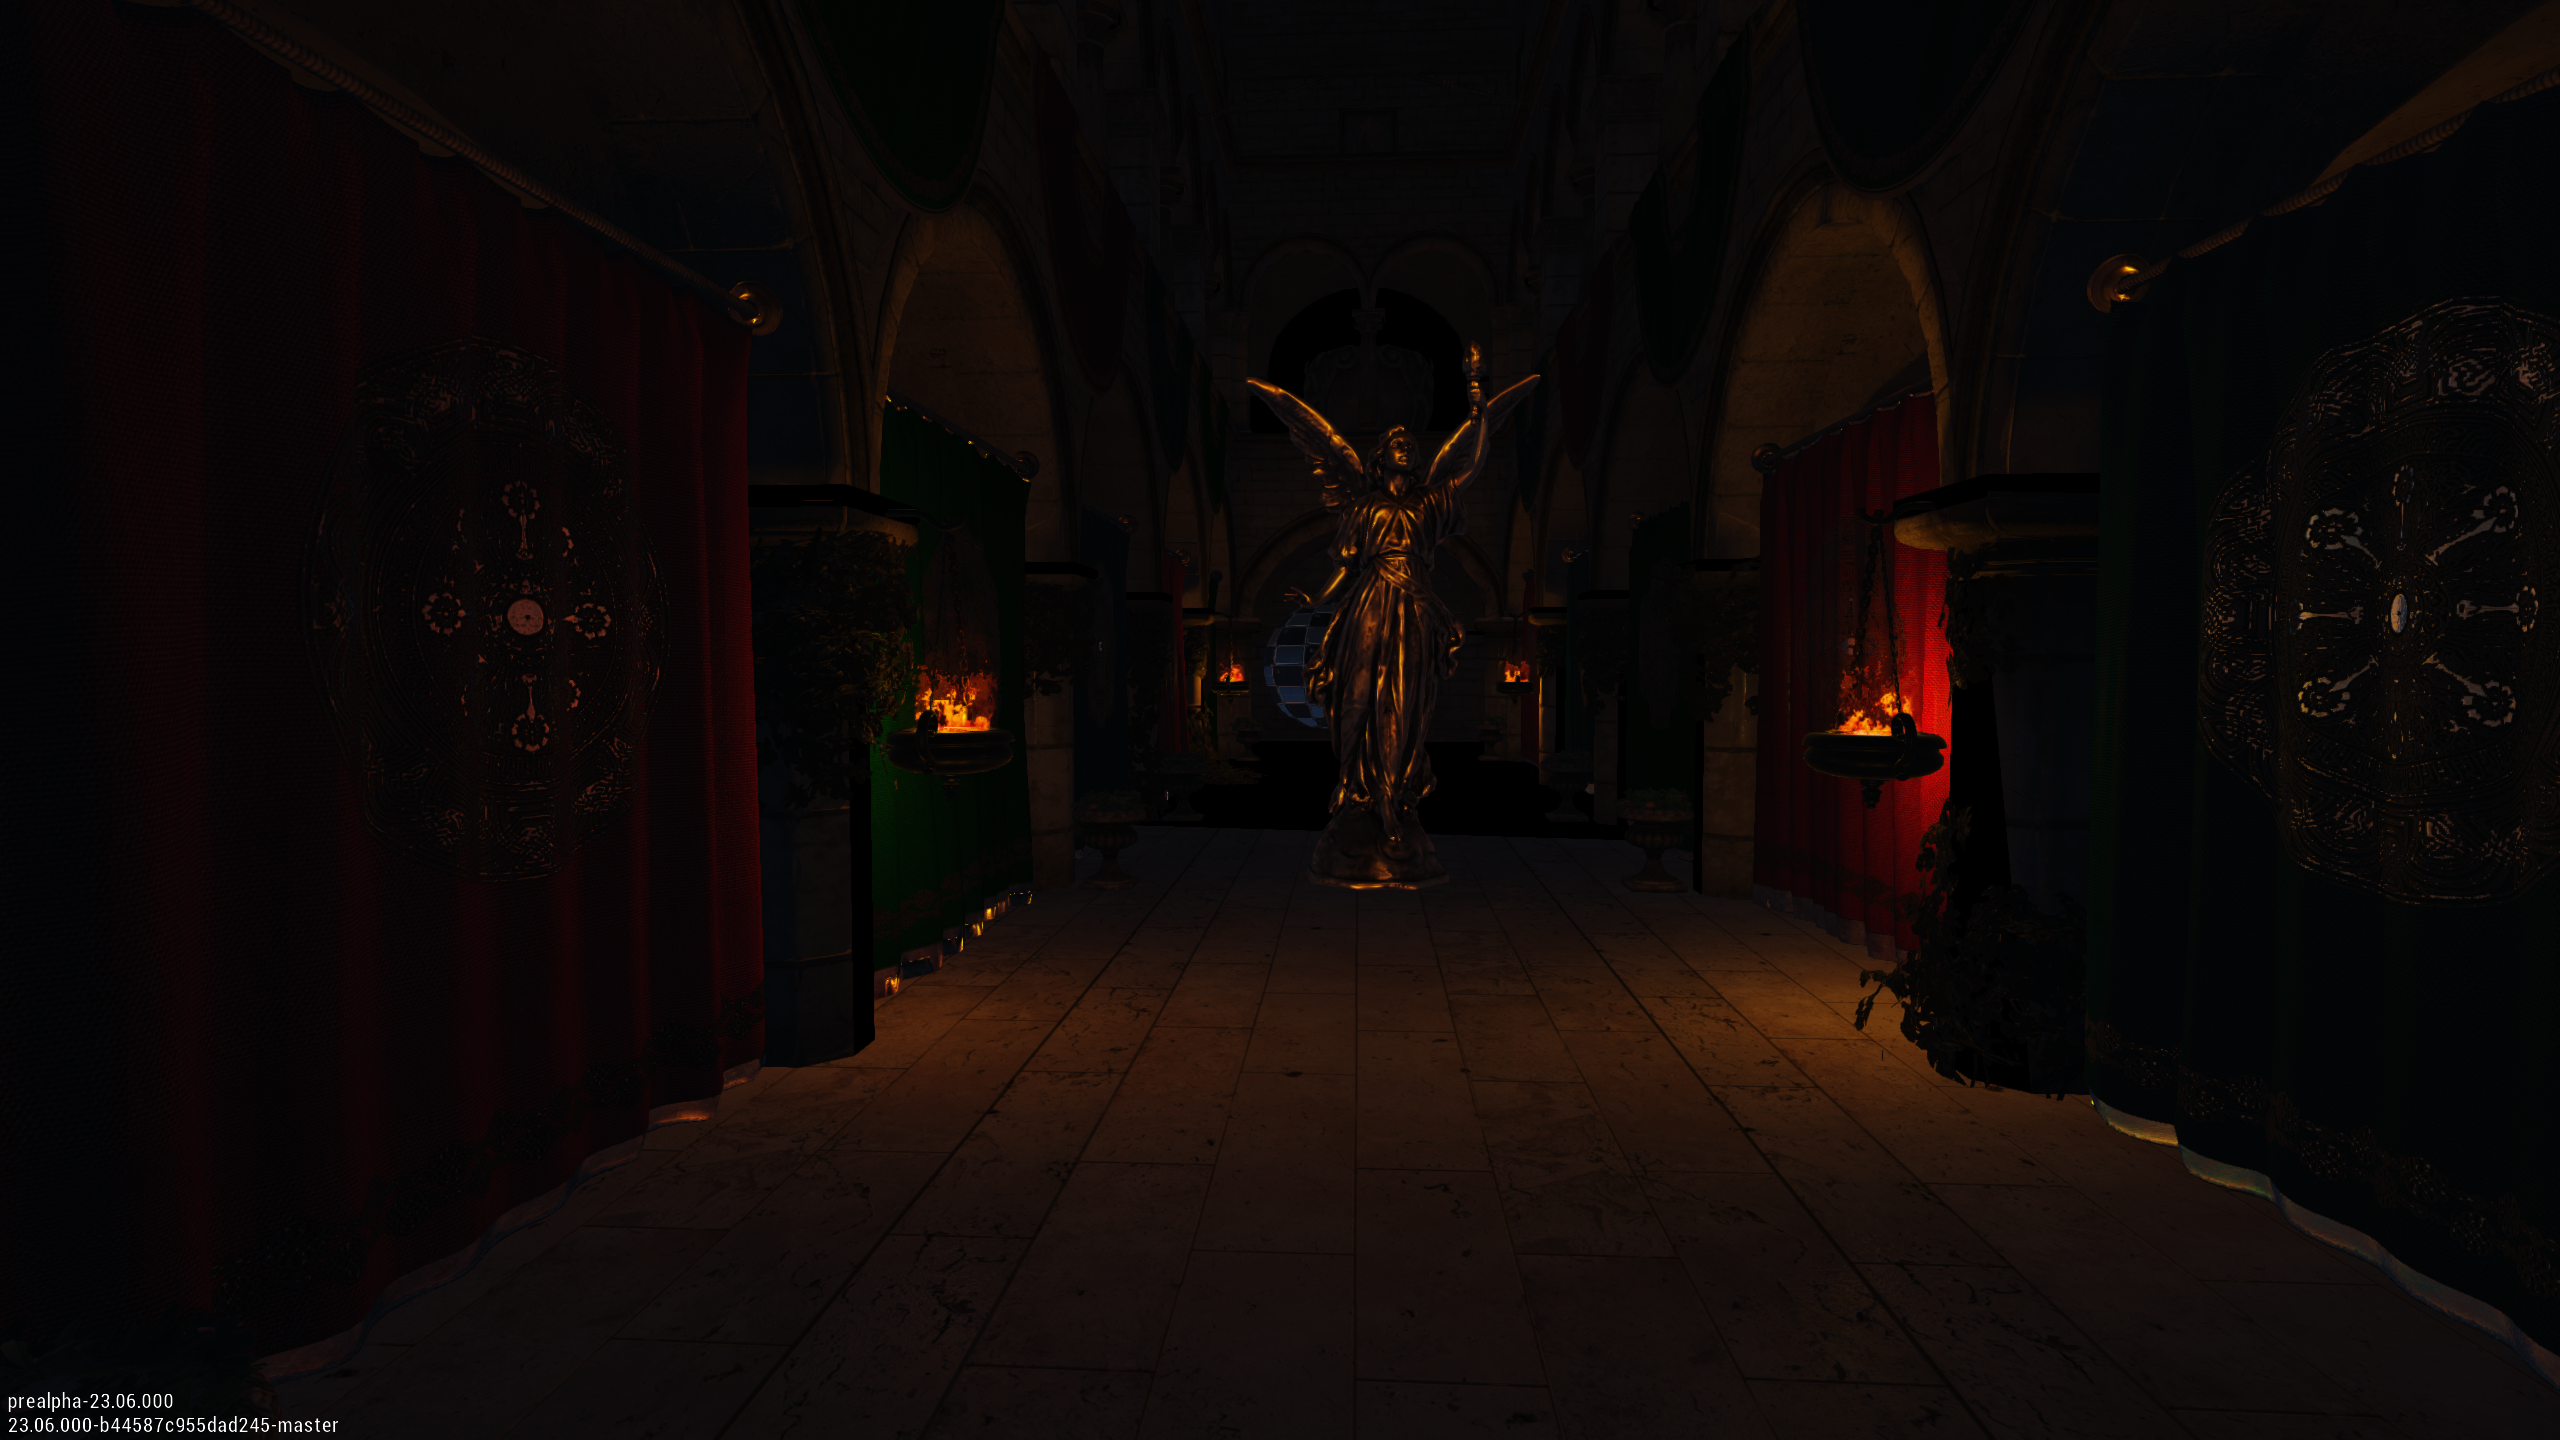 Testing new local lights, ignore the bad normals in my sponza test model